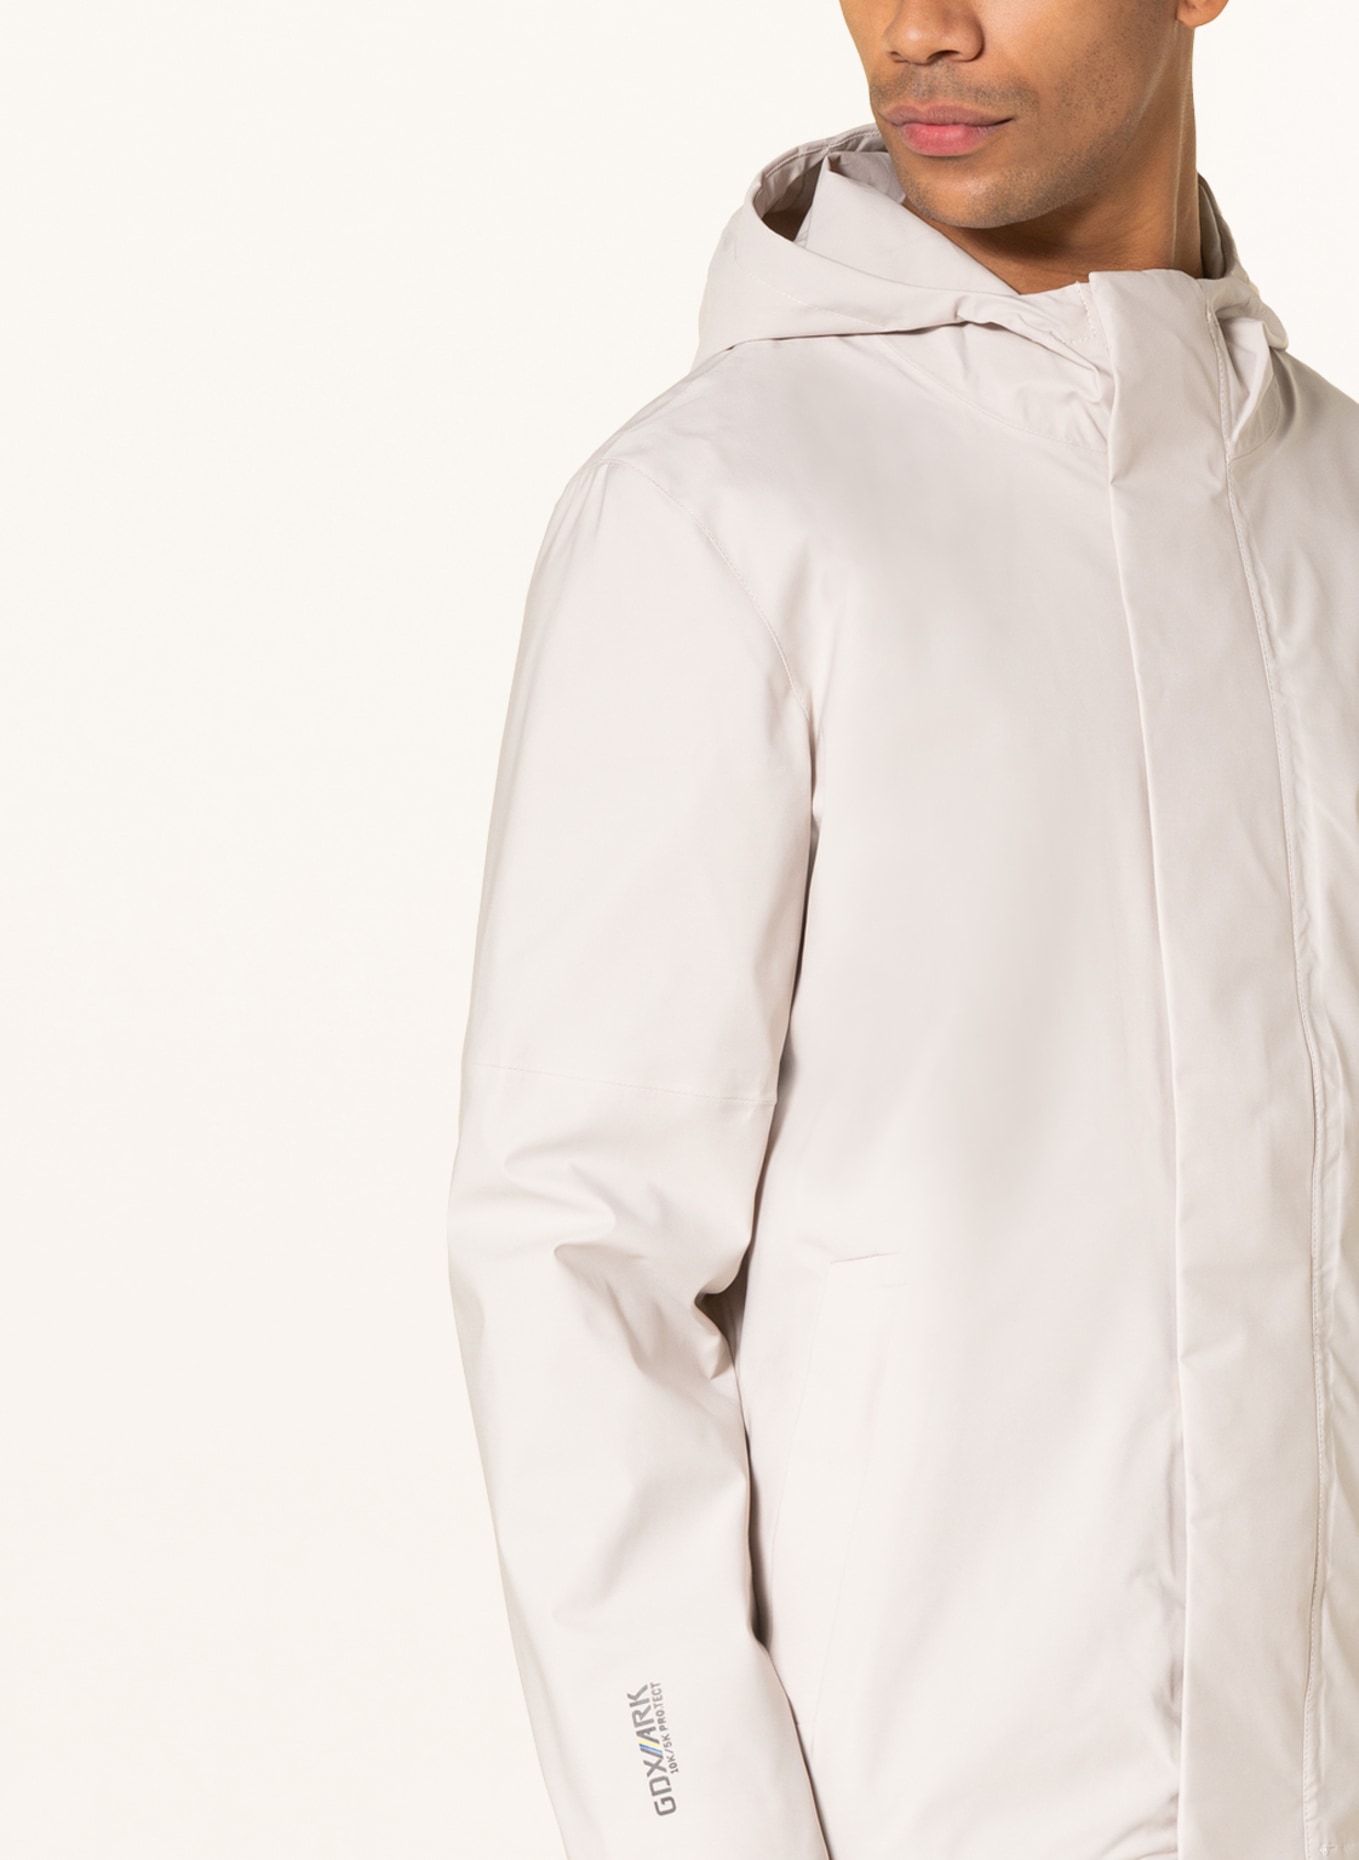 G.I.G.A. DX cream 147 GS killtec jacket Outdoor in by